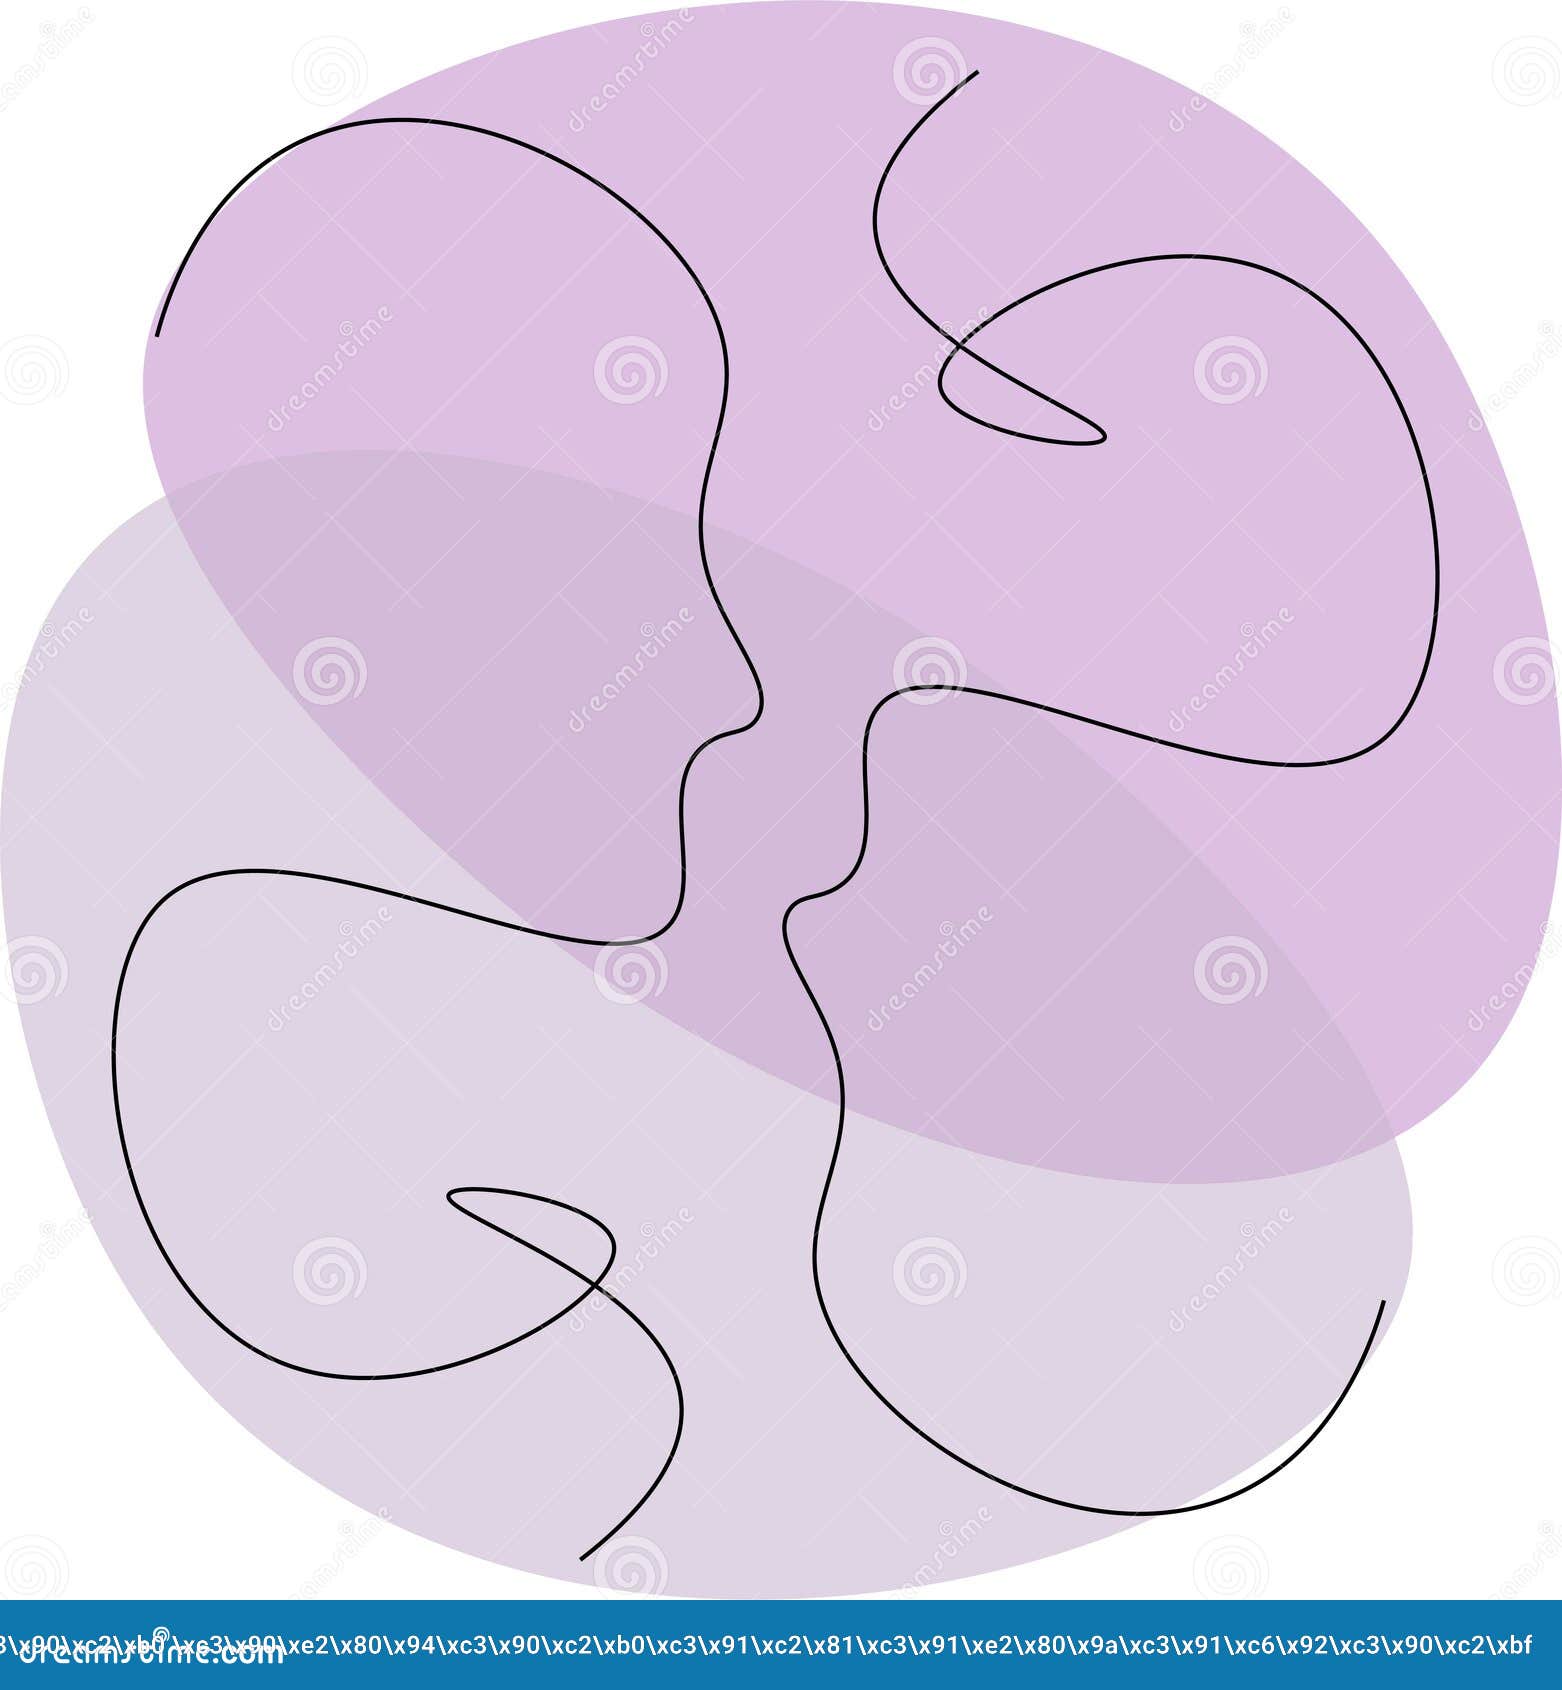 He And She, Linart, Man And Woman, Face Outlines, On Pink, Blue, Purple